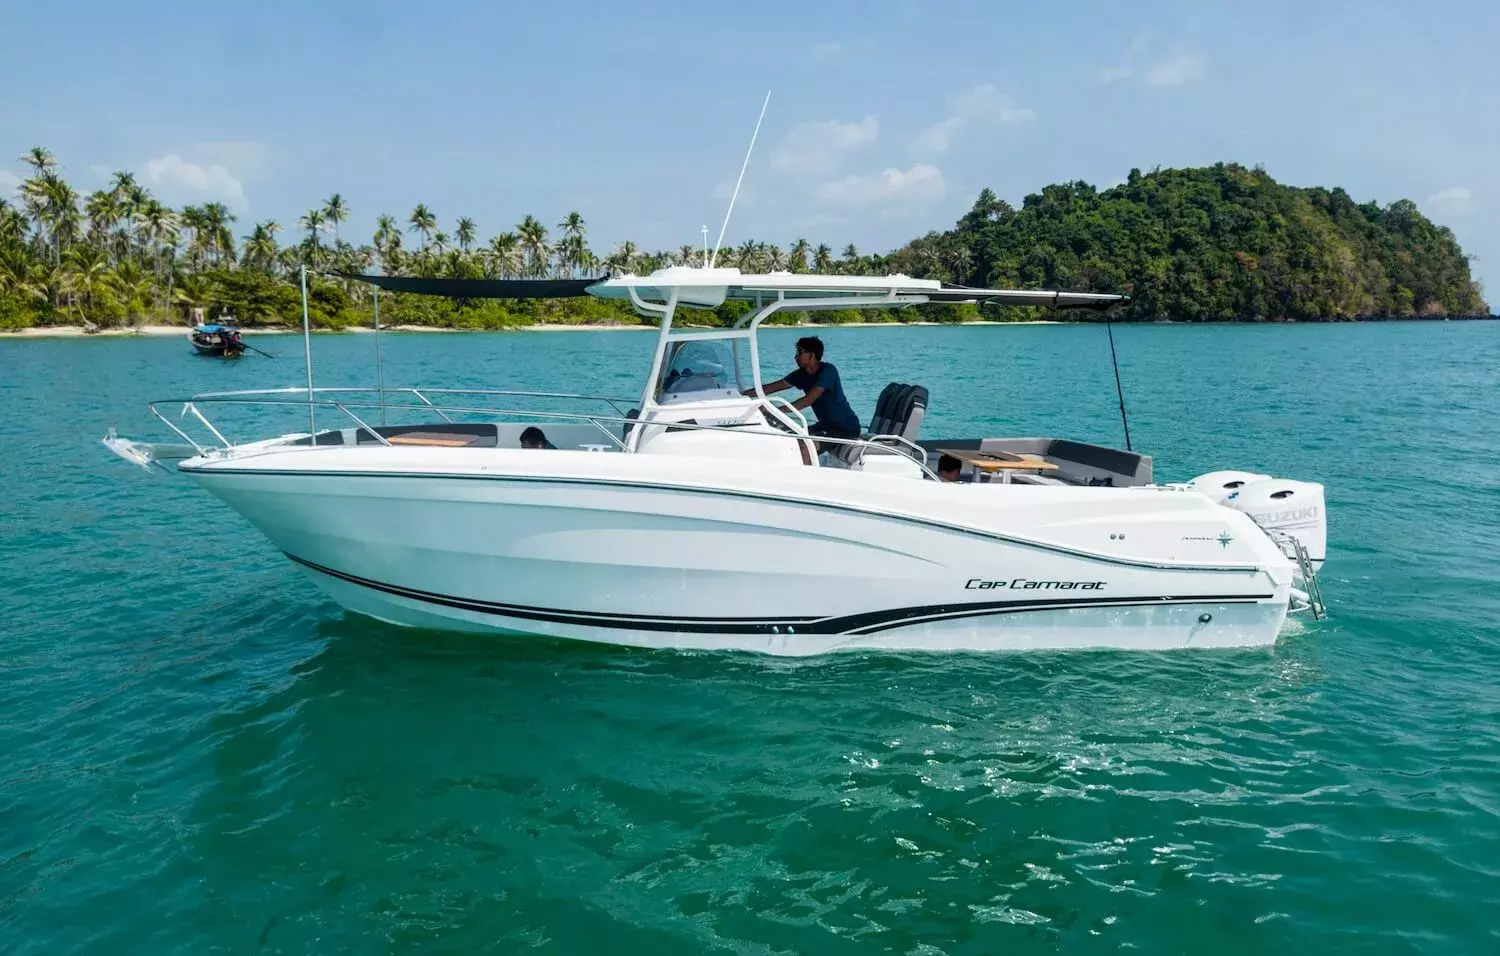 Na-O by Jeanneau - Top rates for a Rental of a private Power Boat in Thailand